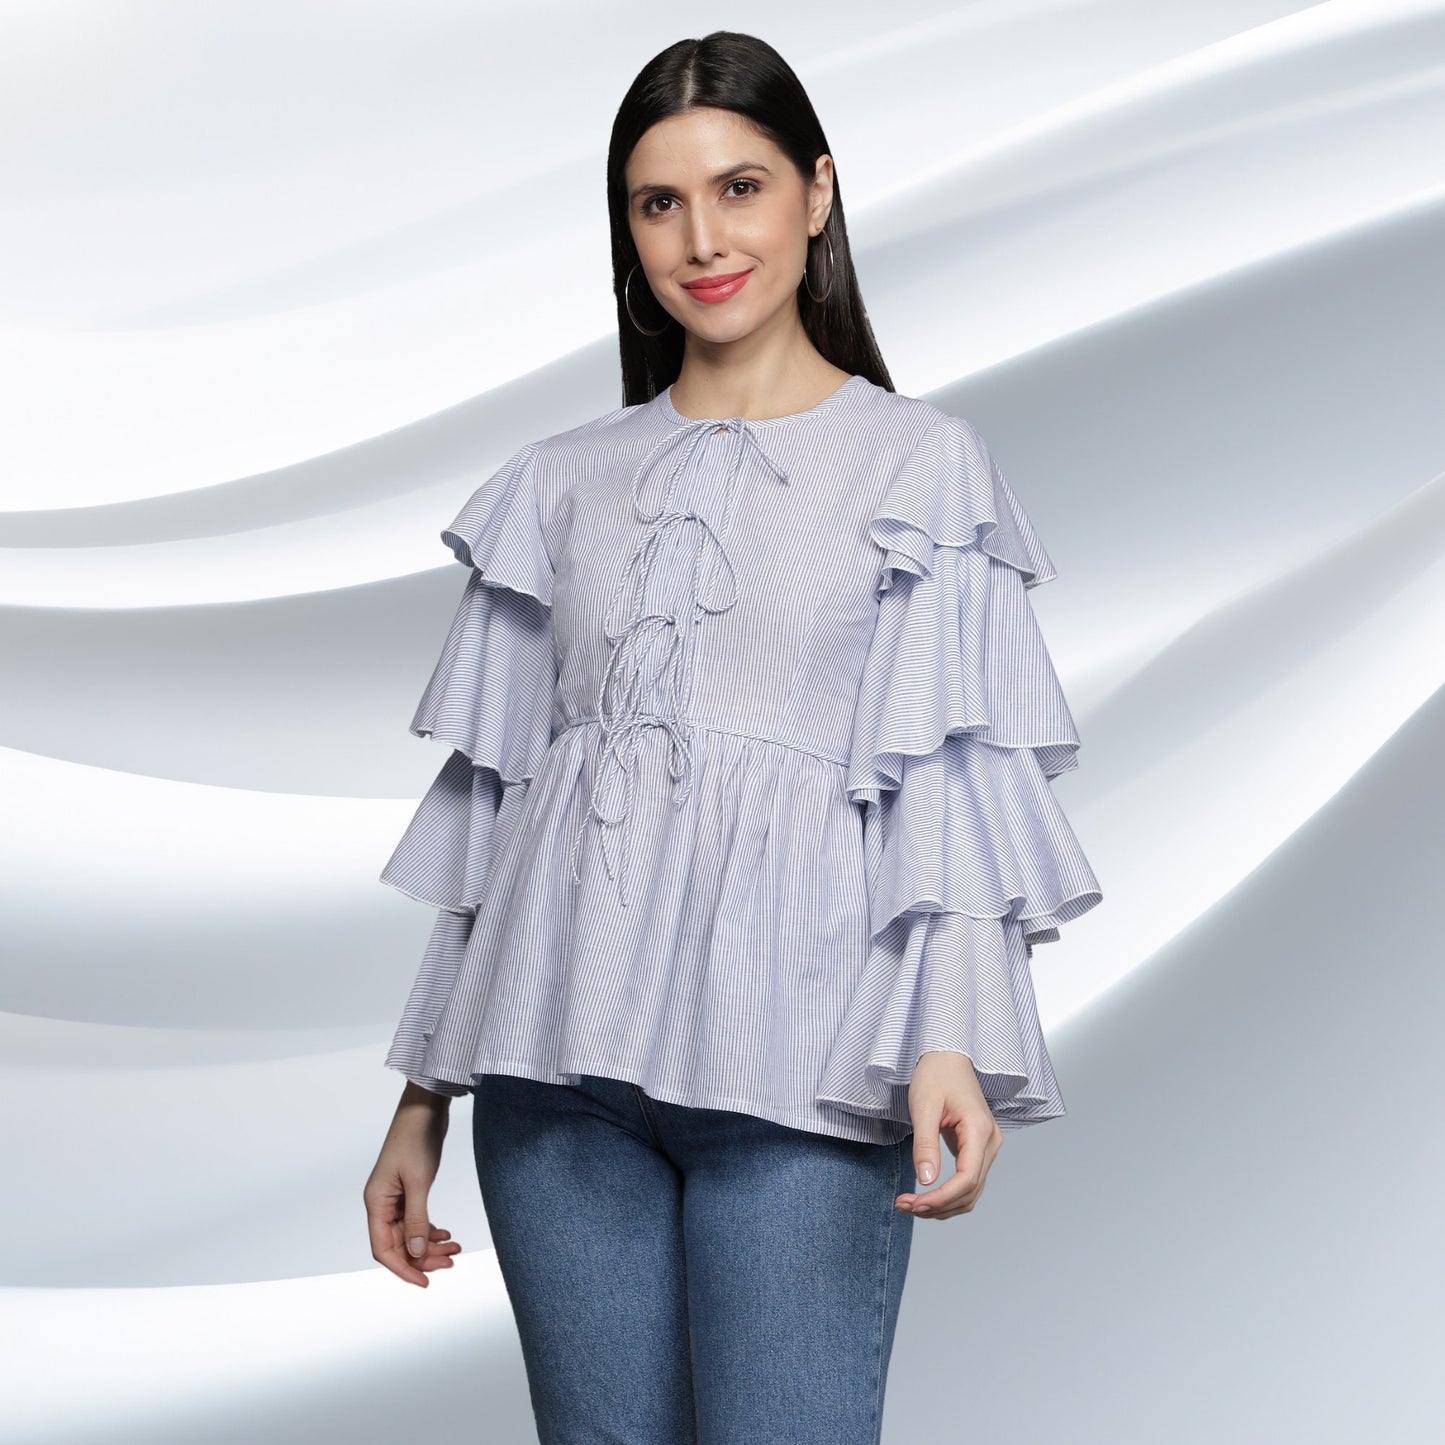 Tops_for_women  Tie_up_Top_Women  Long_sleeves_Top  Gift_For_Her  Flared_Sleeves_Top  Elegant_Cotton_Top  Cute_Top  Cotton_Top  Cotton_long_sleeves  Blue_Top  Blue_stripes_Top  Beautiful_blouse